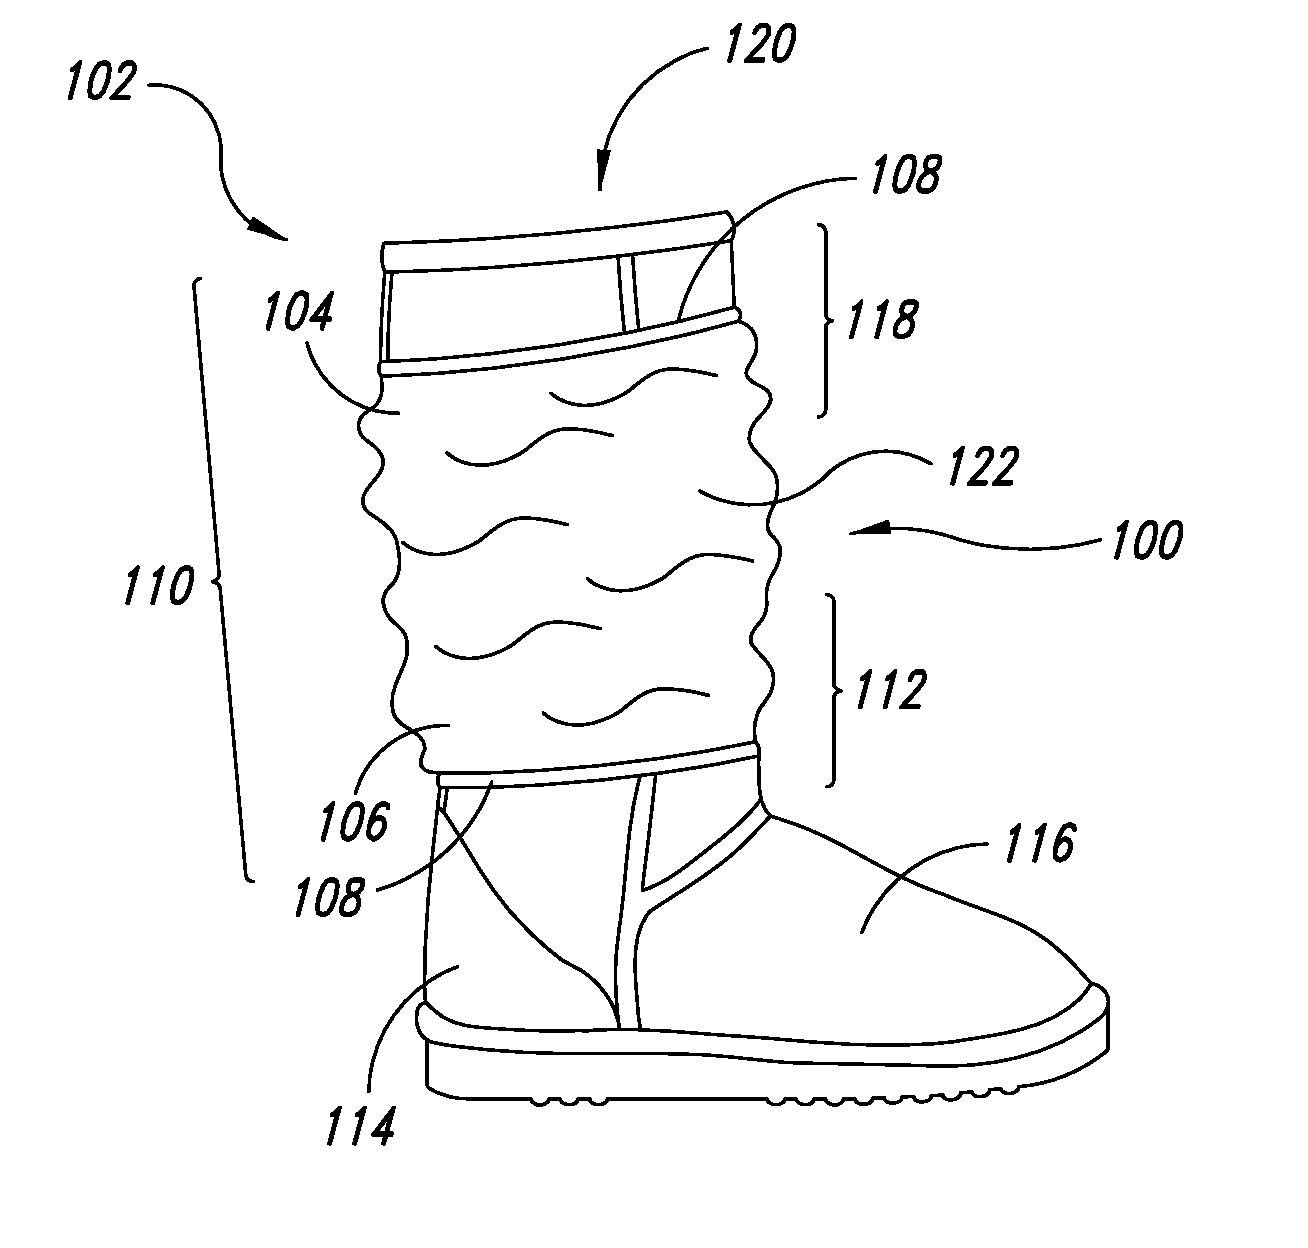 Boot covers